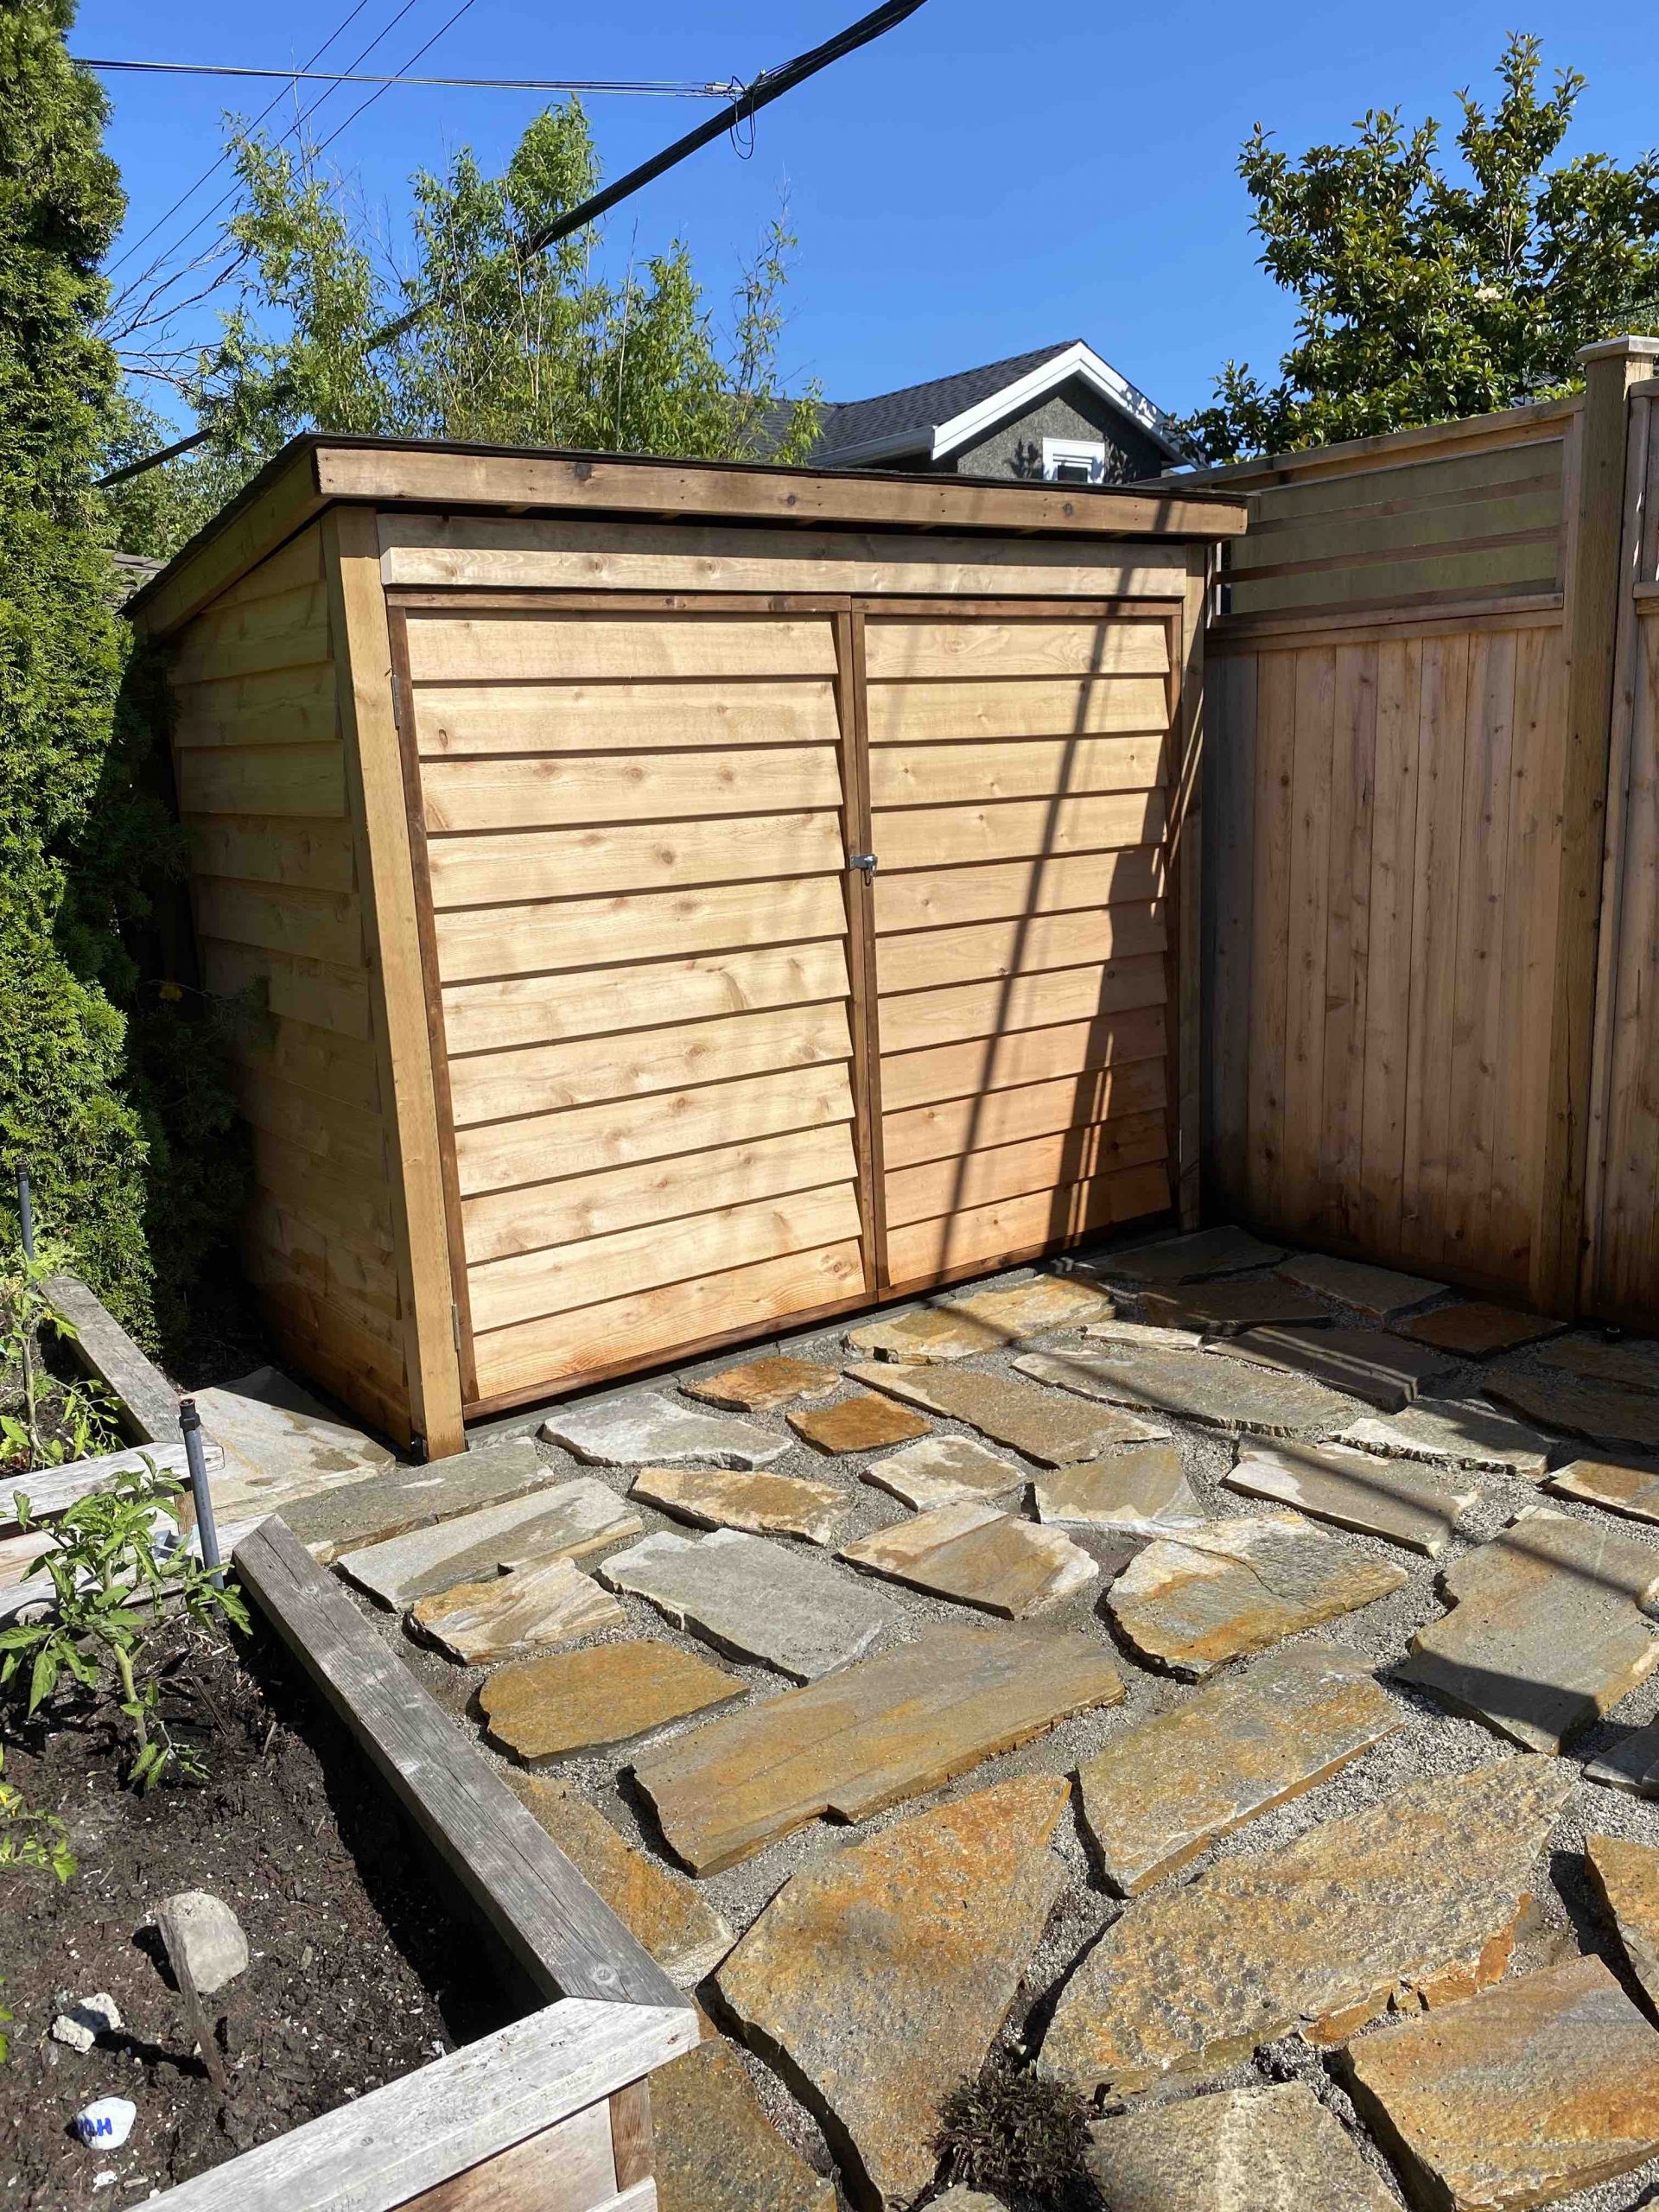 Custom bike shed in Vancouver backyard. Space efficient shed design with upright bike storage. Custom built with cedar siding